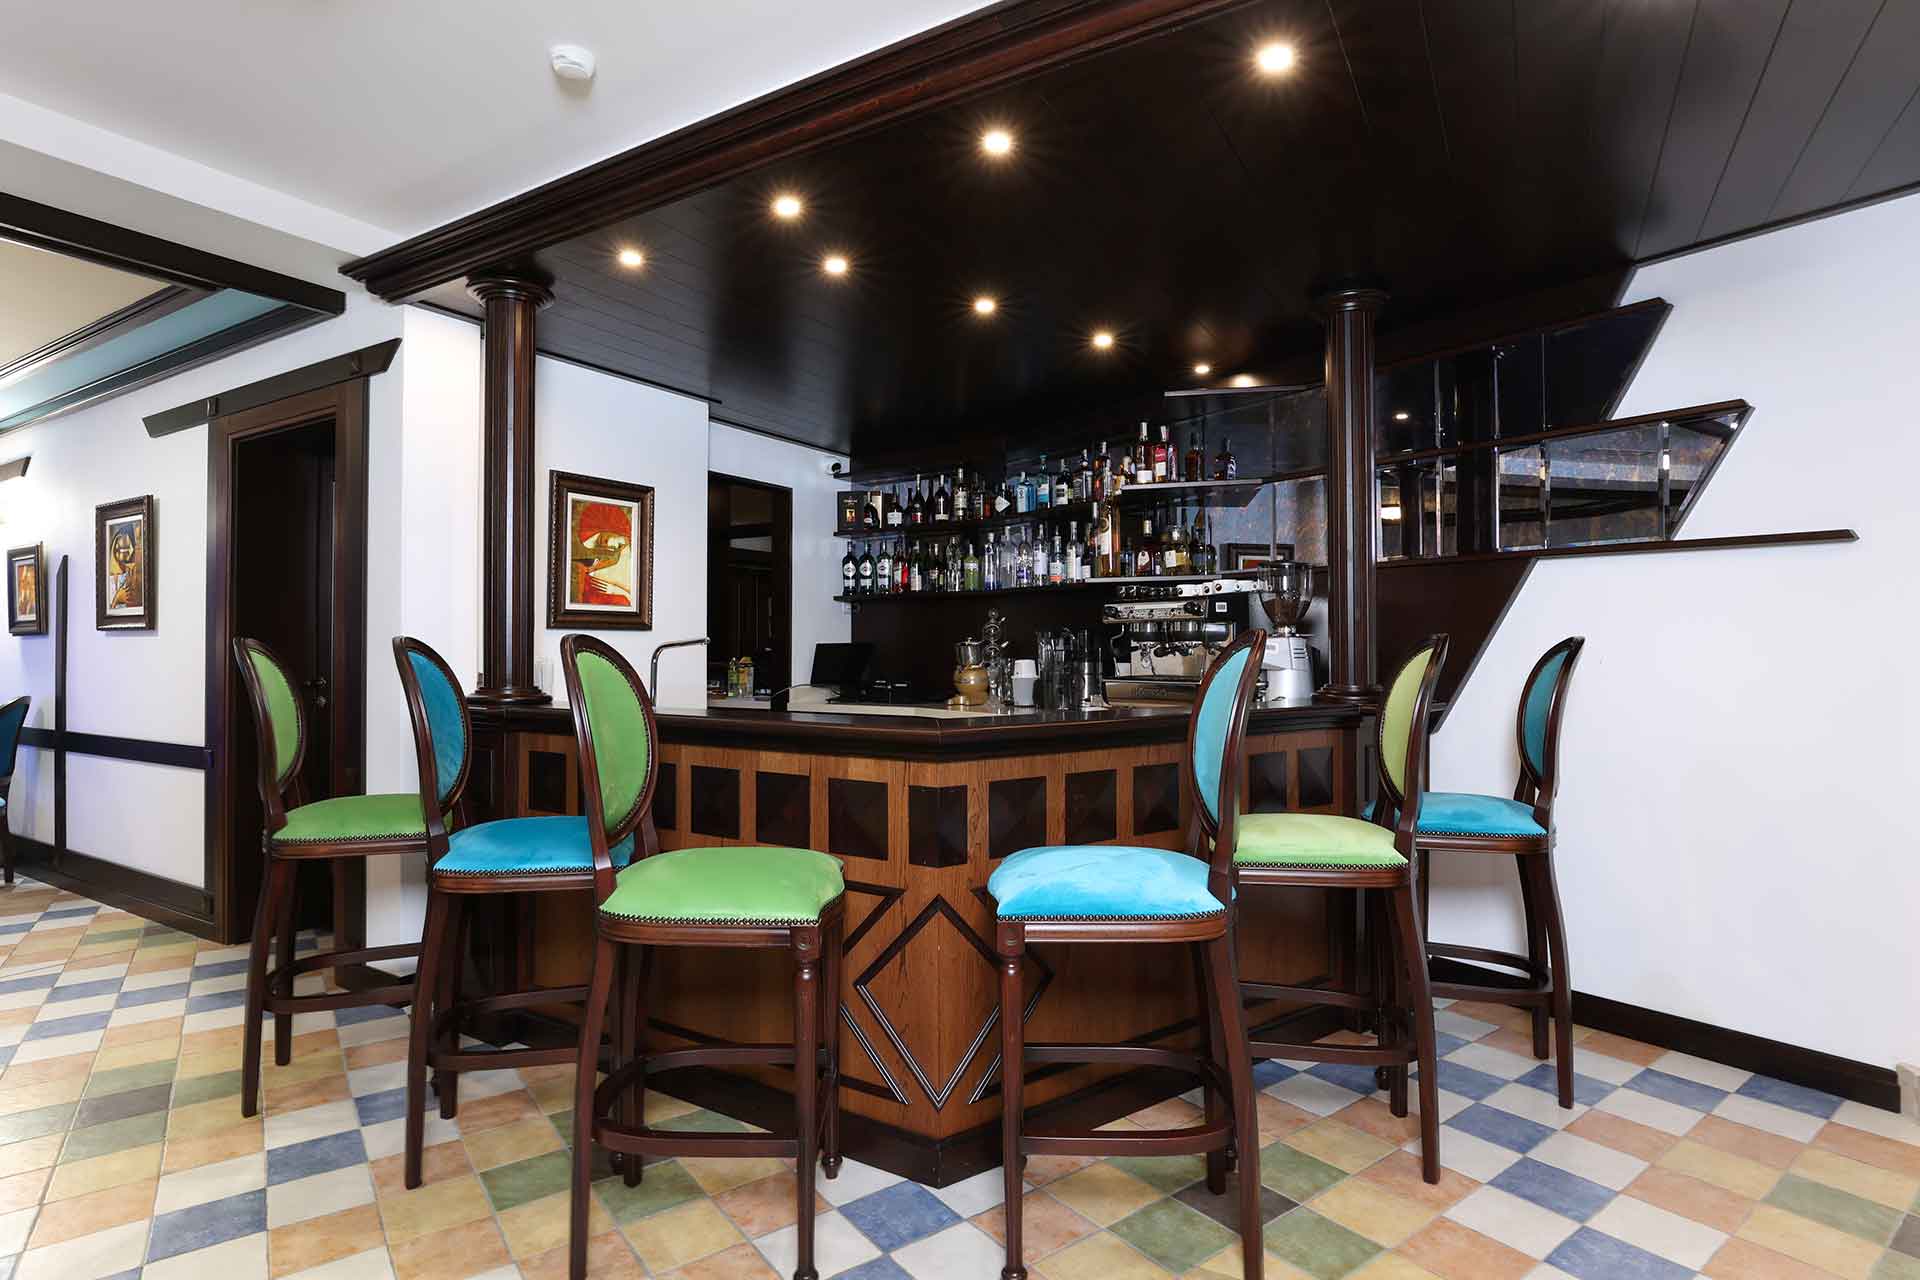 Lobby bar of Armaco Resdience. Bar with two shelfs with alcohol, six green and blue bar chairs .